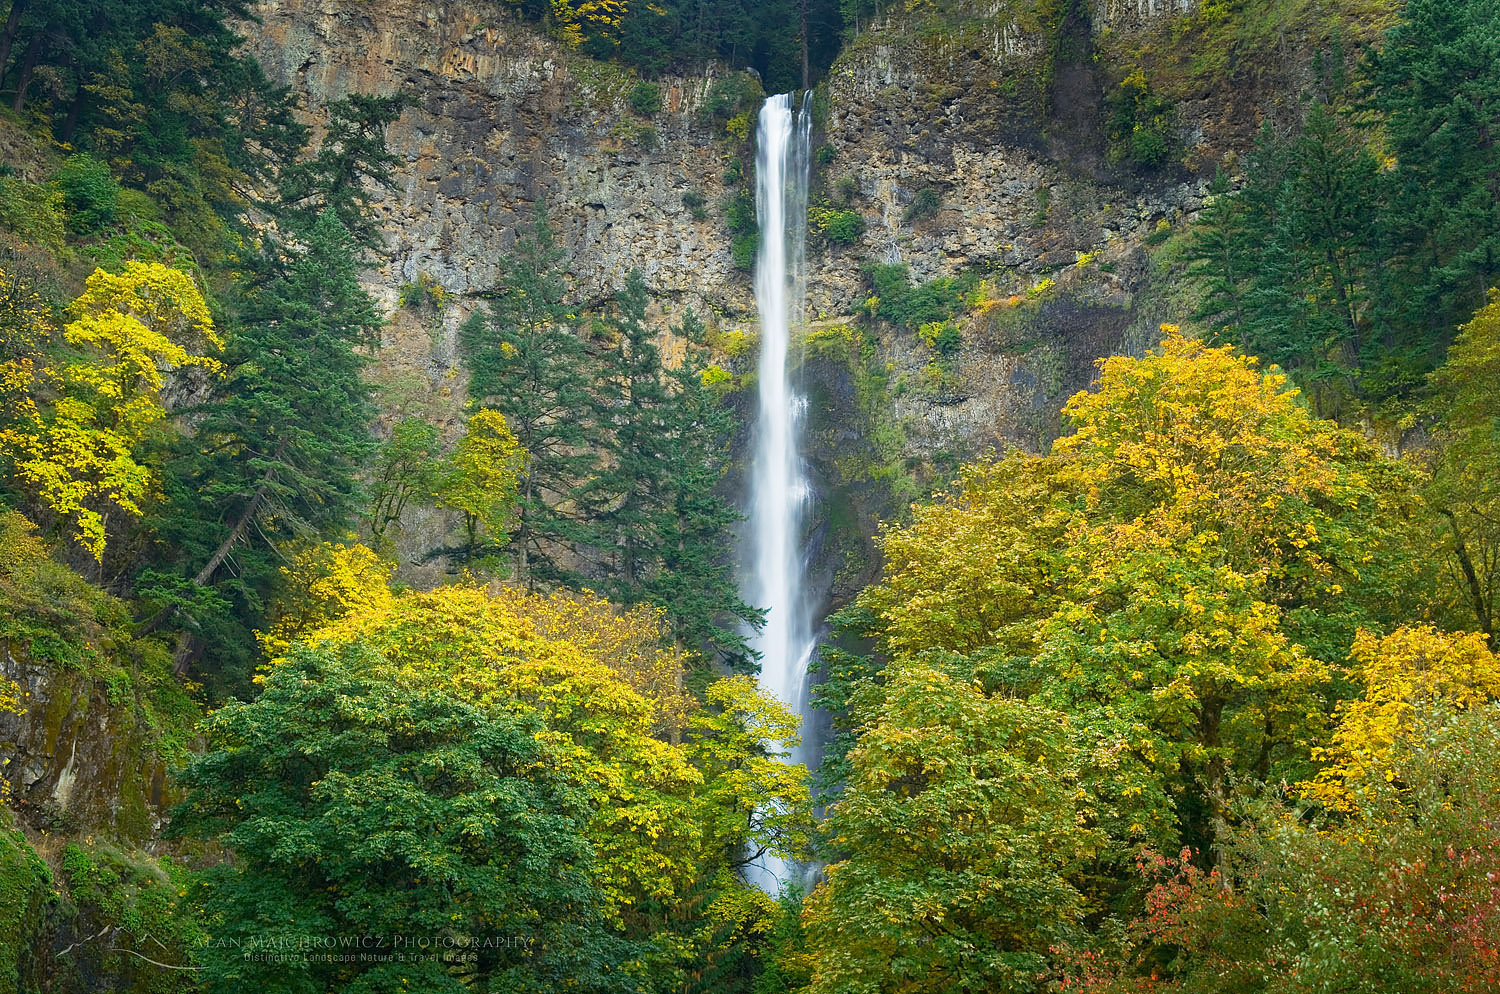 Multnomah Falls, one of the most well known scenic attractions in Oregon and the Pacific Northwest, Columbia River Gorge National Scenic Area Oregon #46808